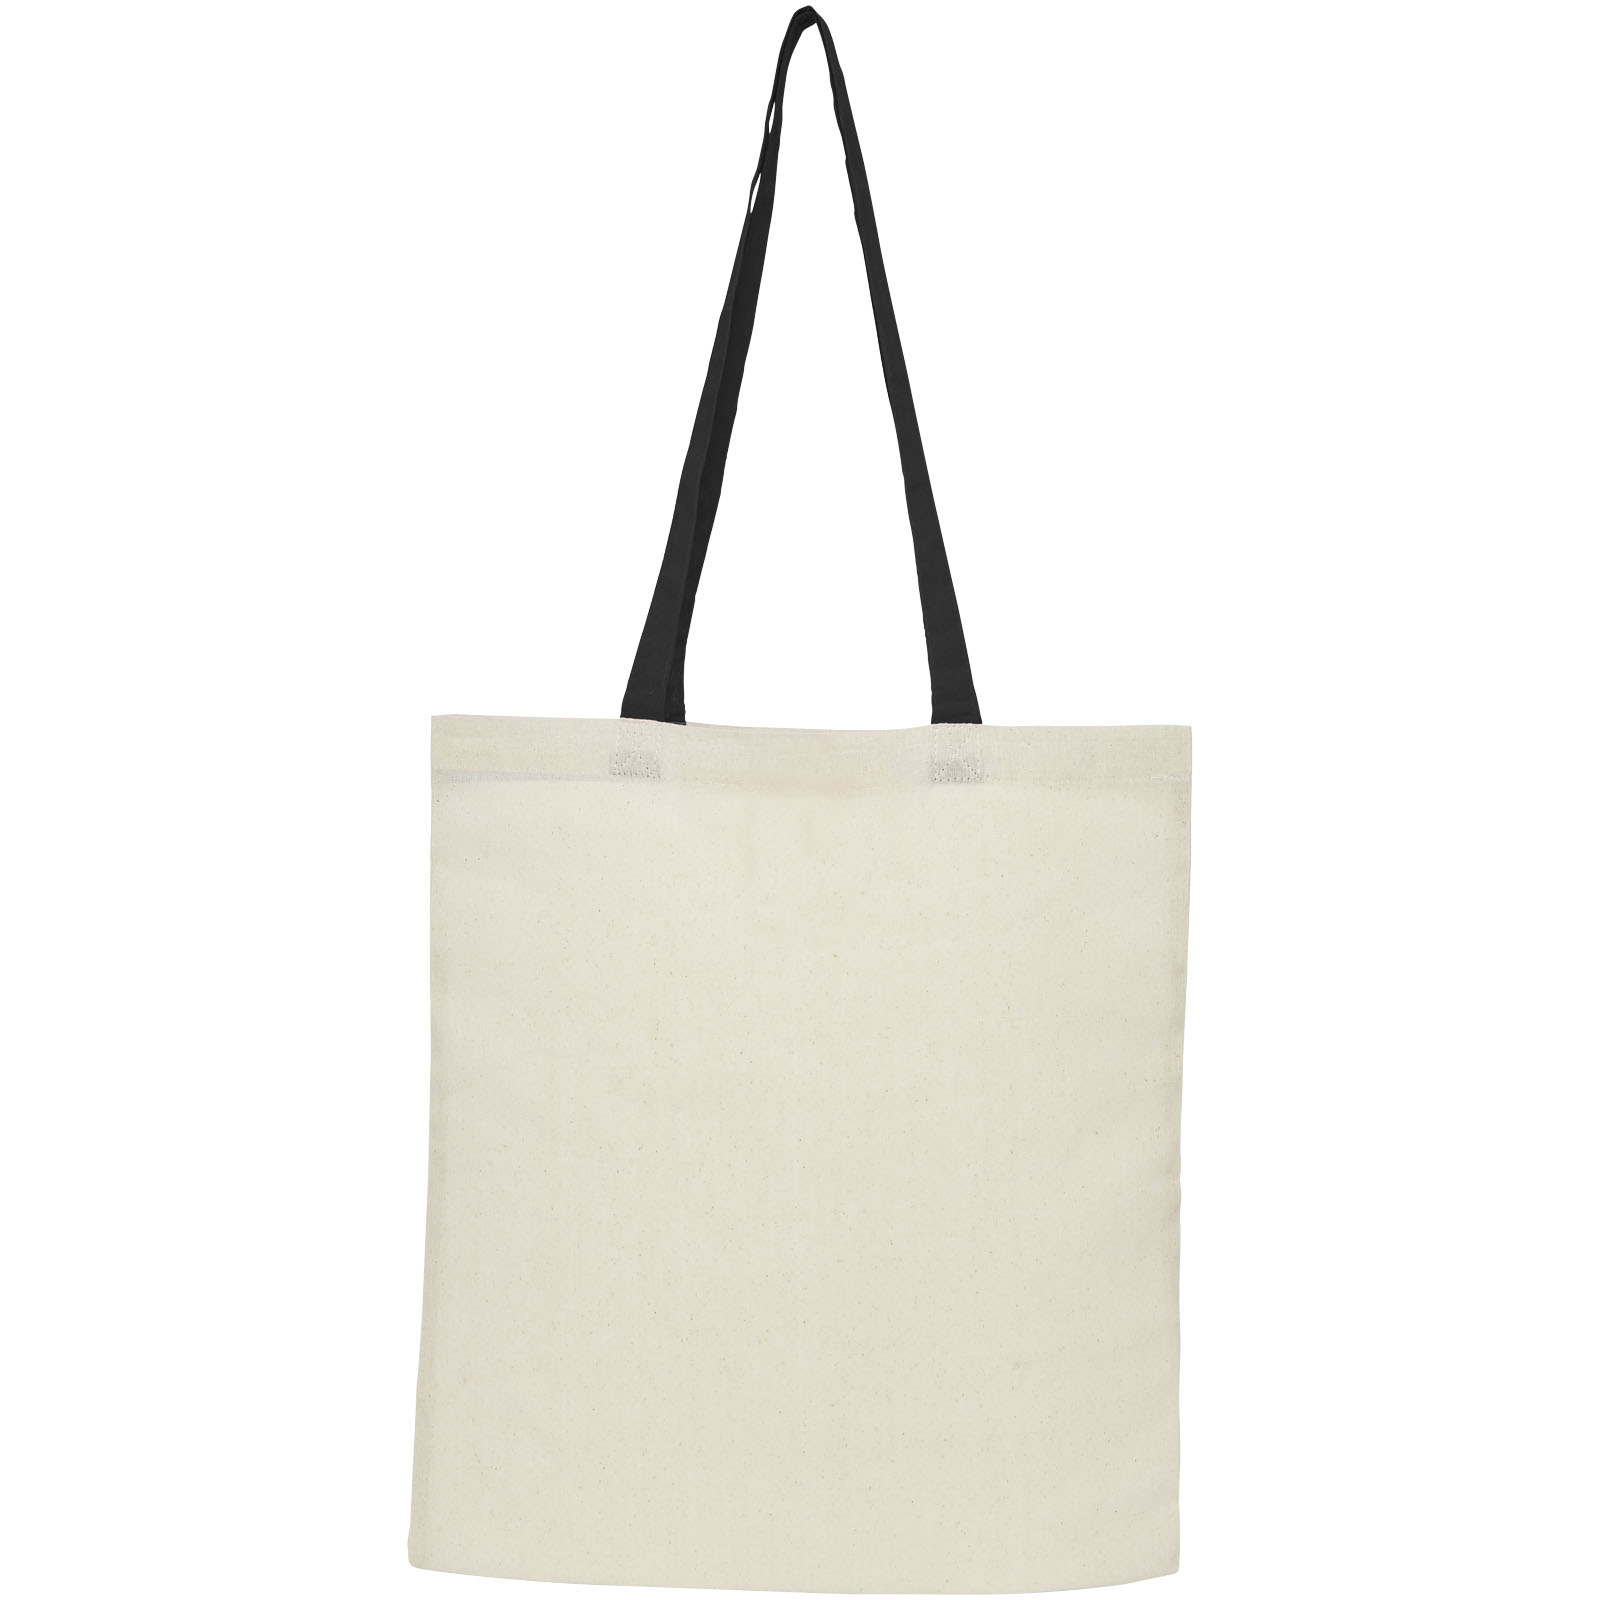 Advertising Shopping & Tote Bags - Nevada 100 g/m² cotton foldable tote bag 7L - 2